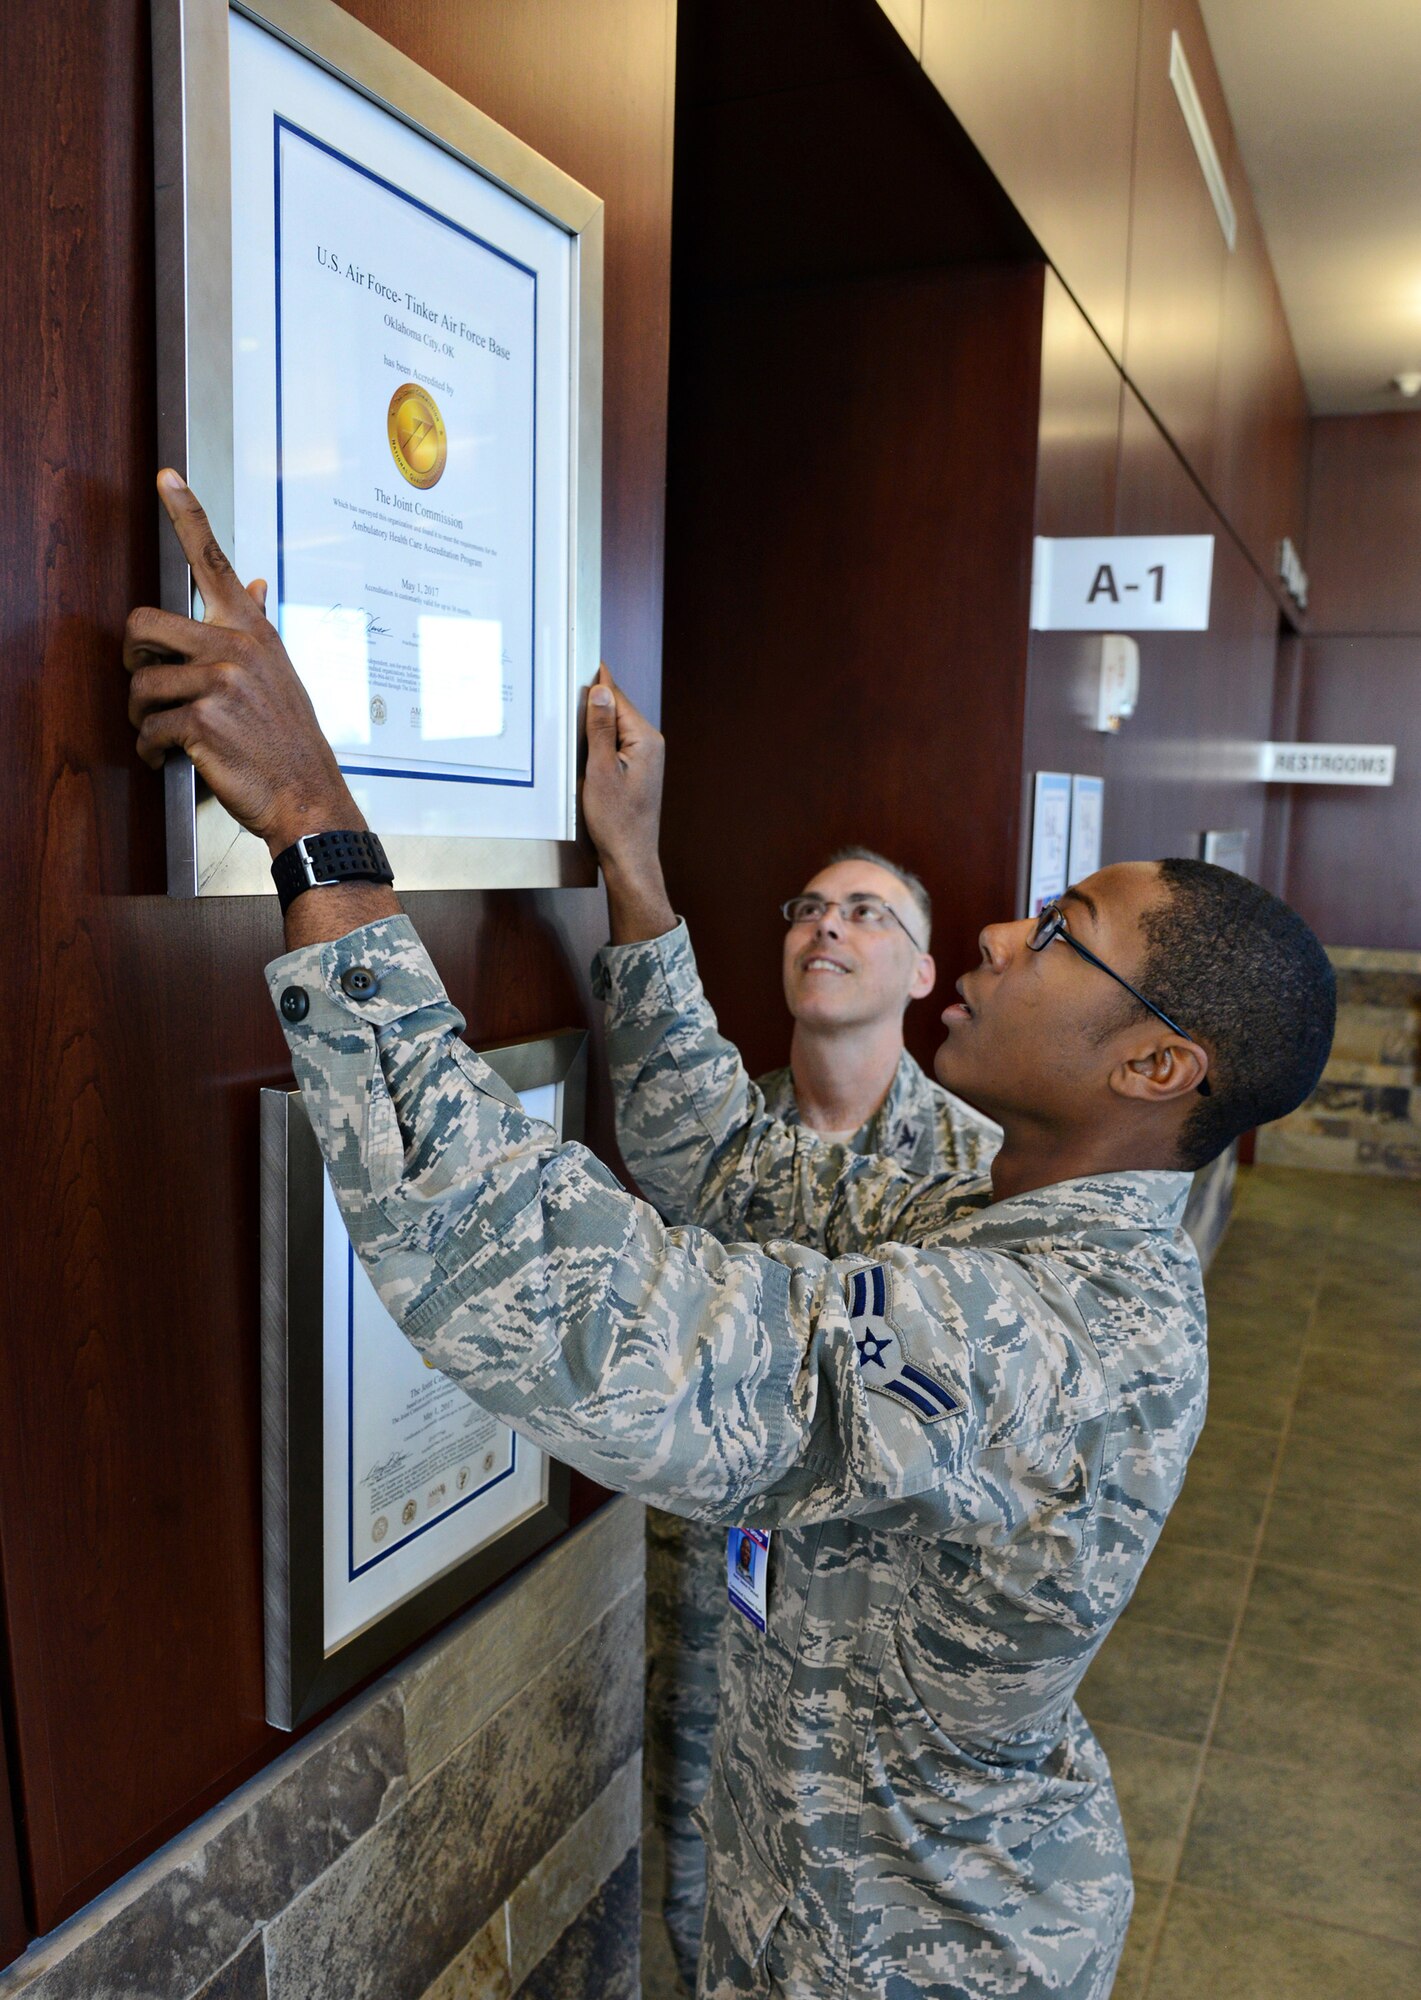 While 72nd Medical Group Commander Col. Christopher Grussendorf watches, Airman 1st Class Jason Pannell, with the 72nd Medical Support Squadron, carefully hangs a certificate from The Joint Commission, bestowing a three-year accreditation to the 72nd MDG by meeting the requirements for the Ambulatory Health Care Accreditation Program.